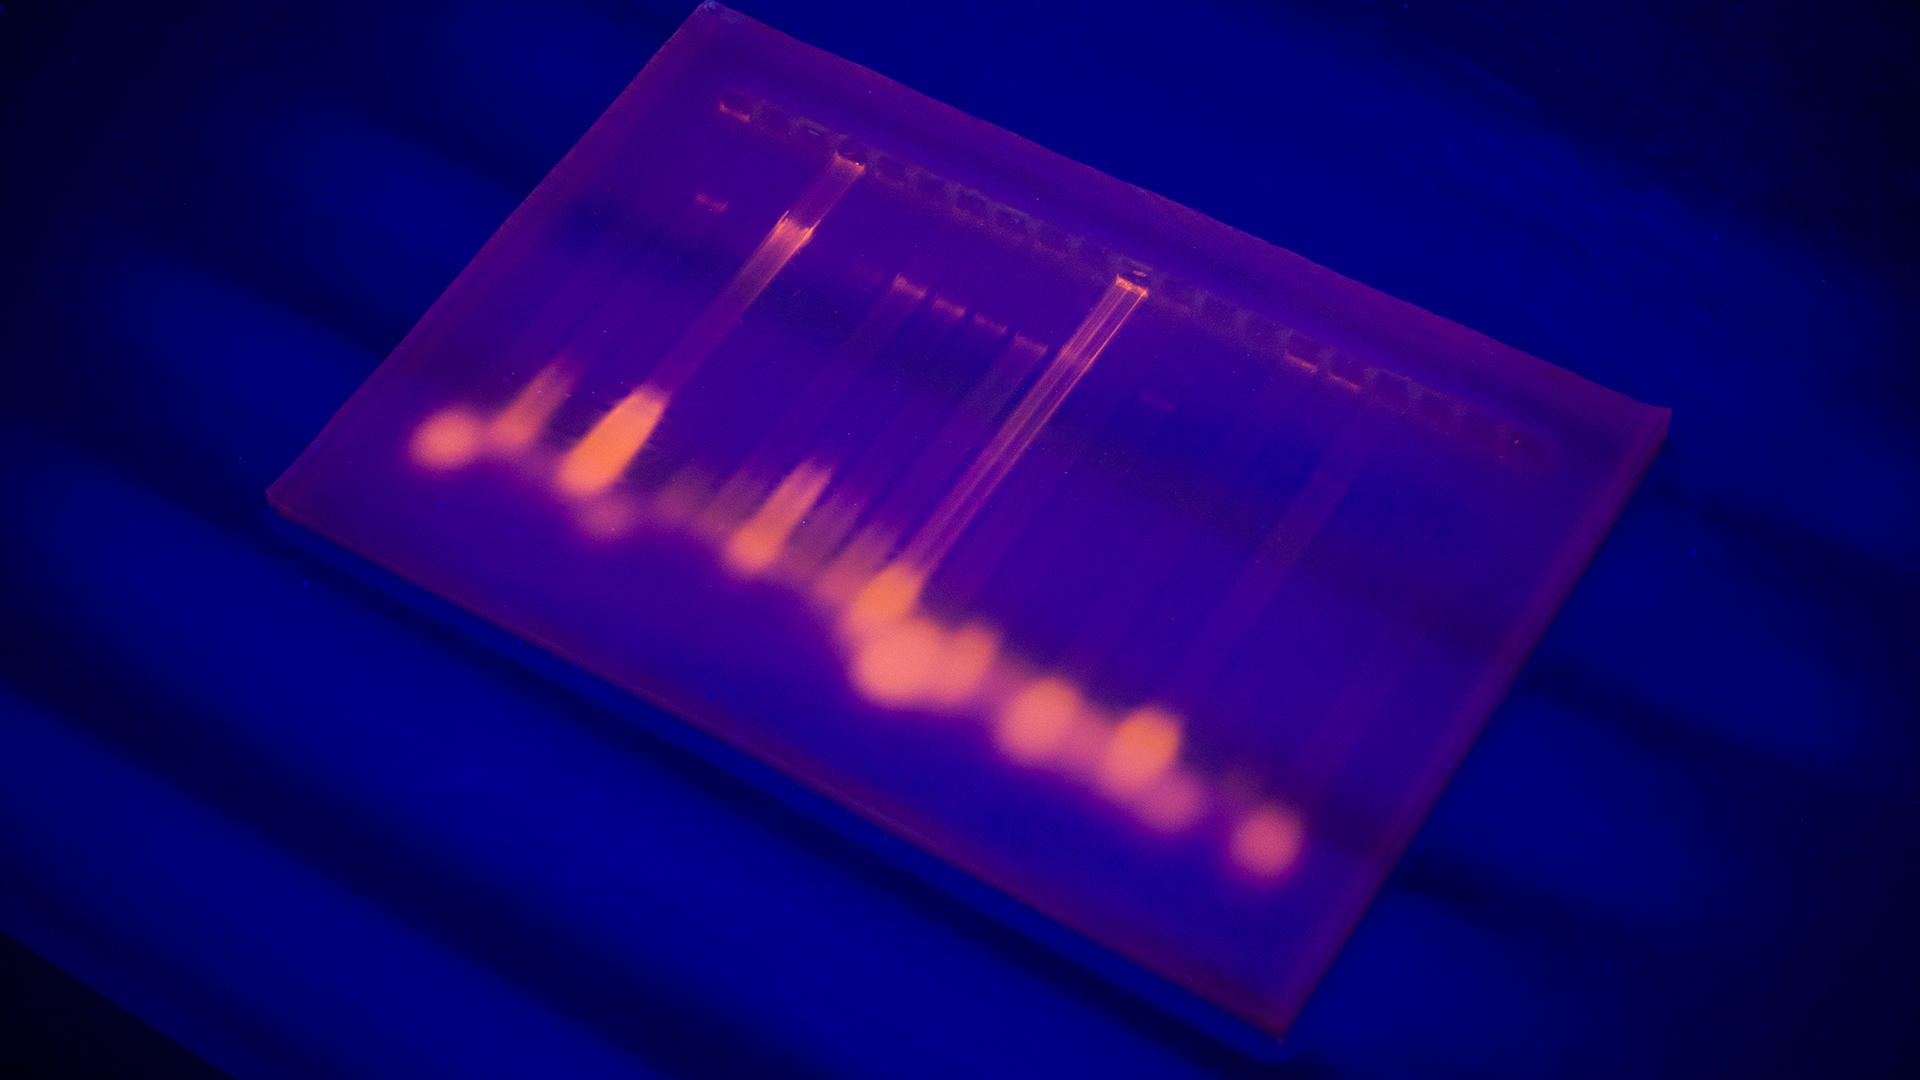 Close-up of a gel with DNA after electrophoresis. Results of electrophoresis after PCR.